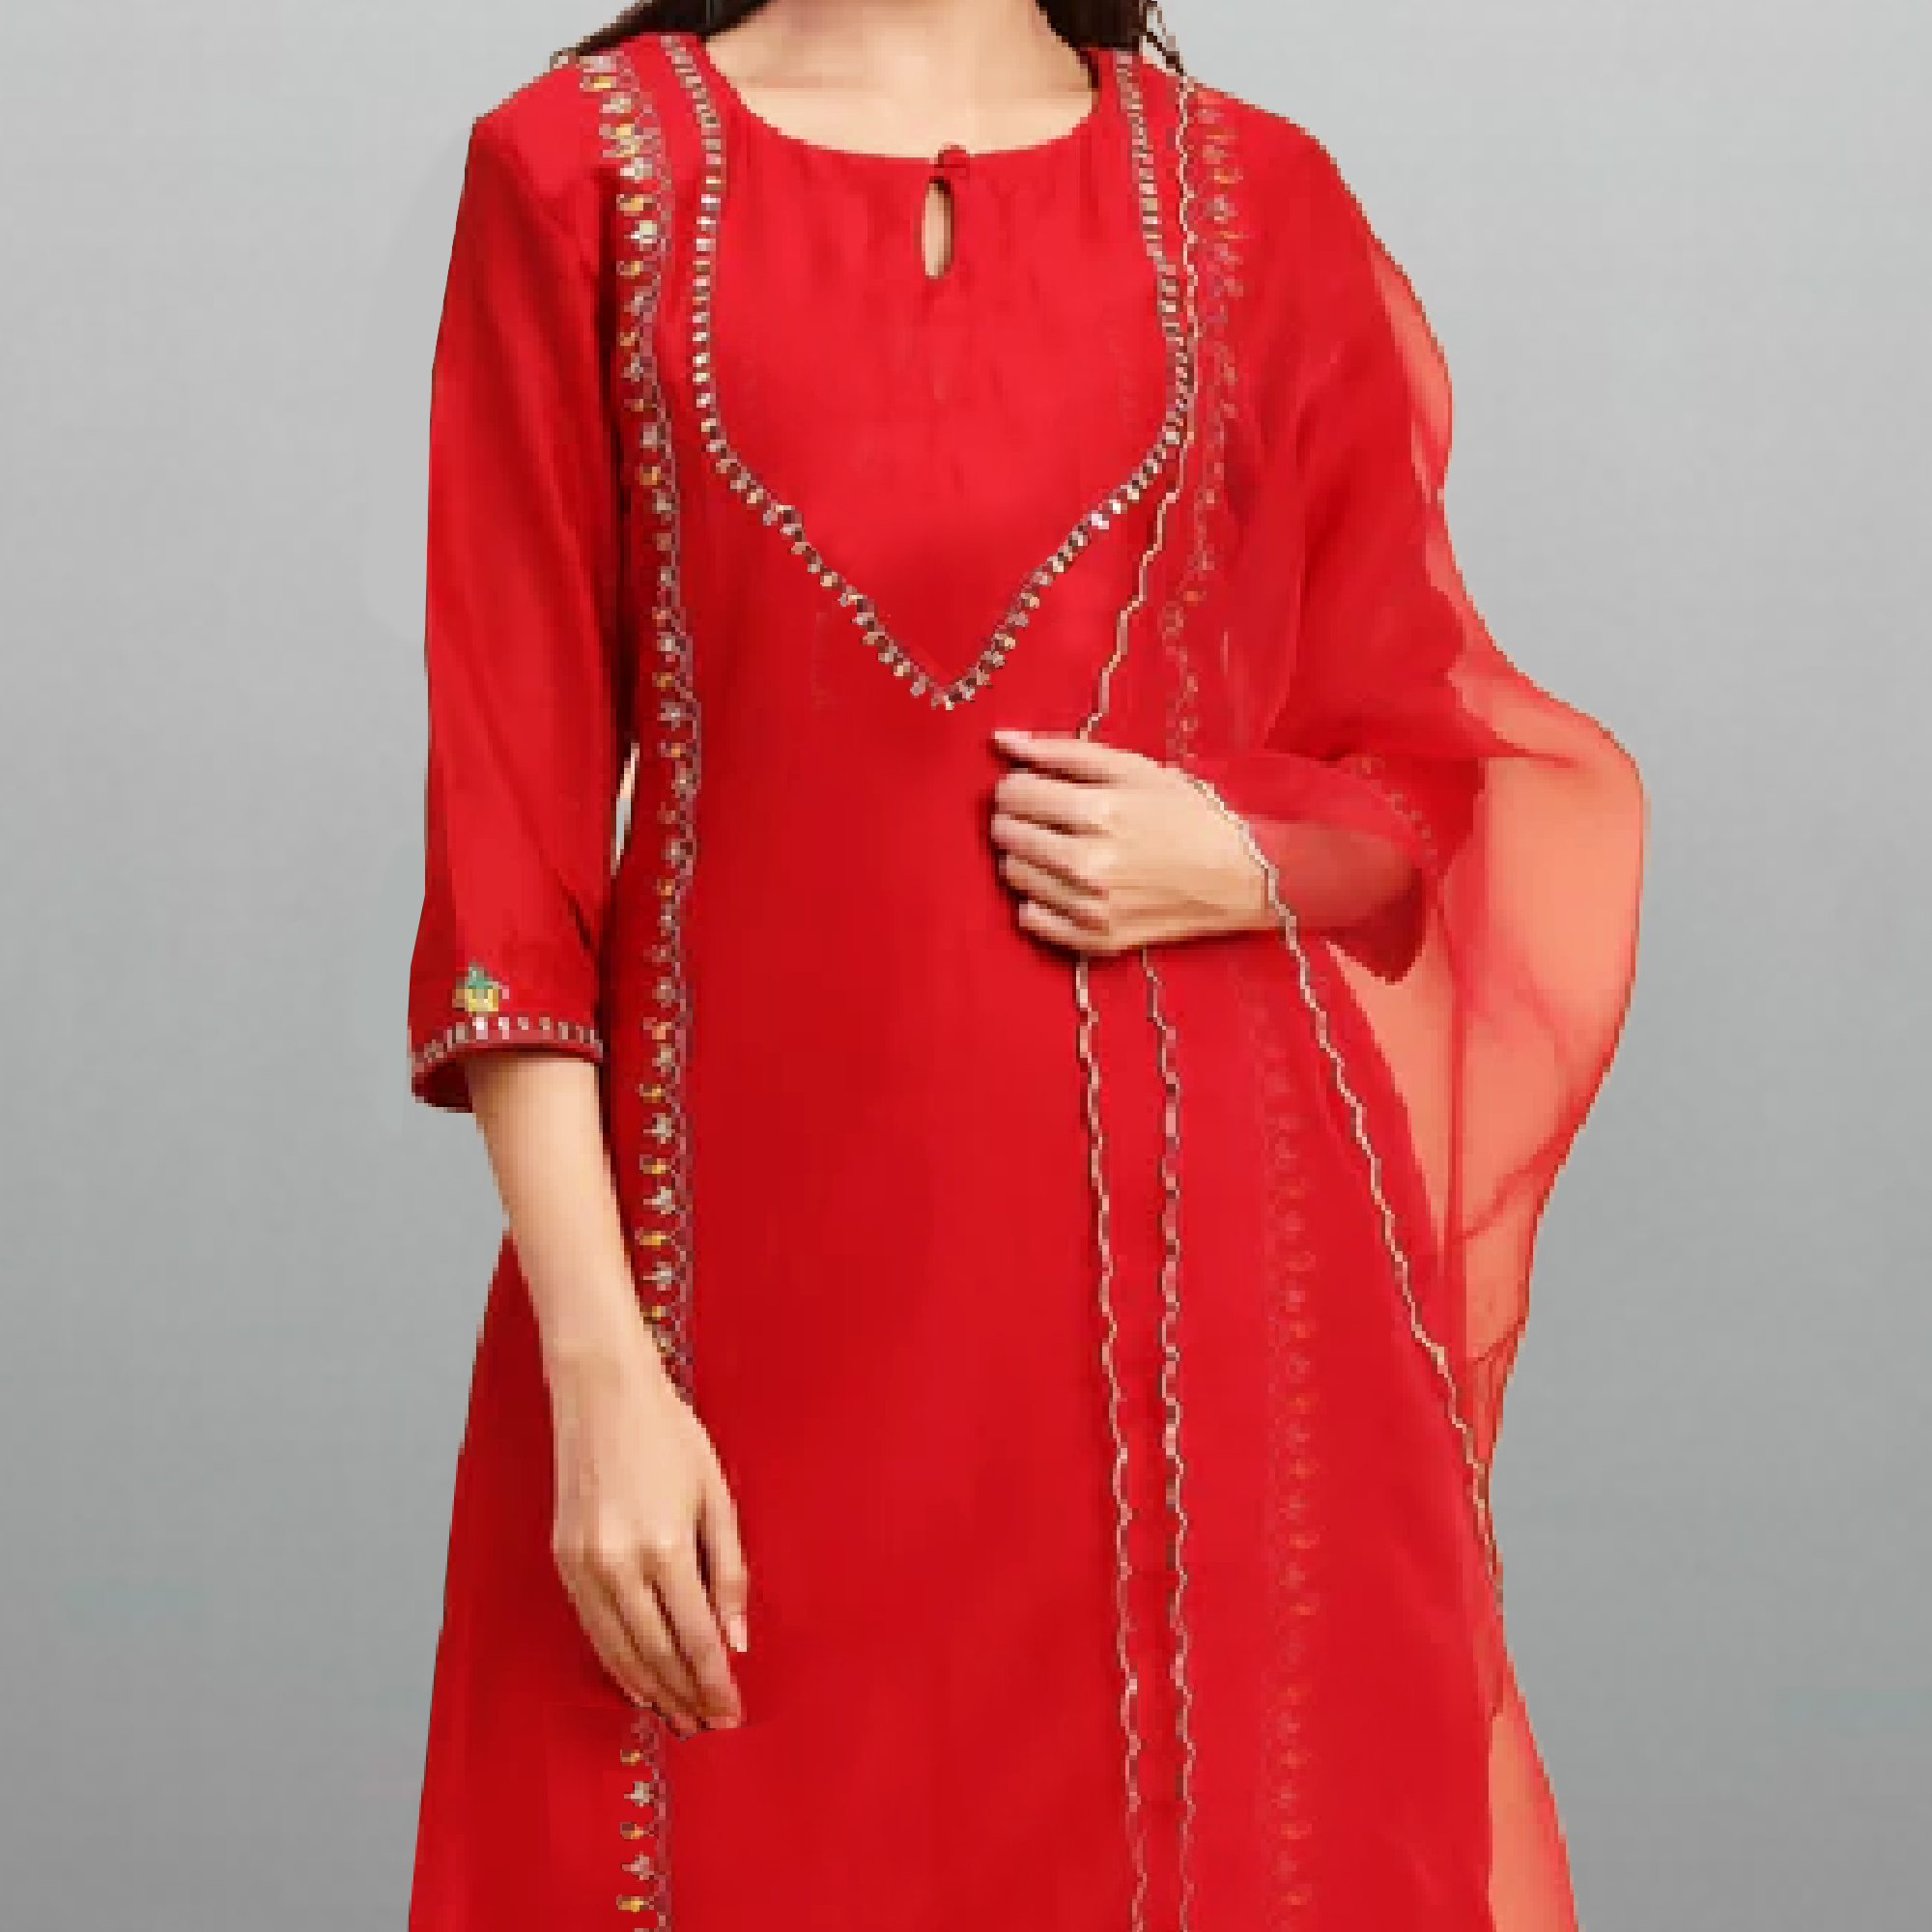 Women's cherry red kurti set with with embroidery and lace border-RWKS039